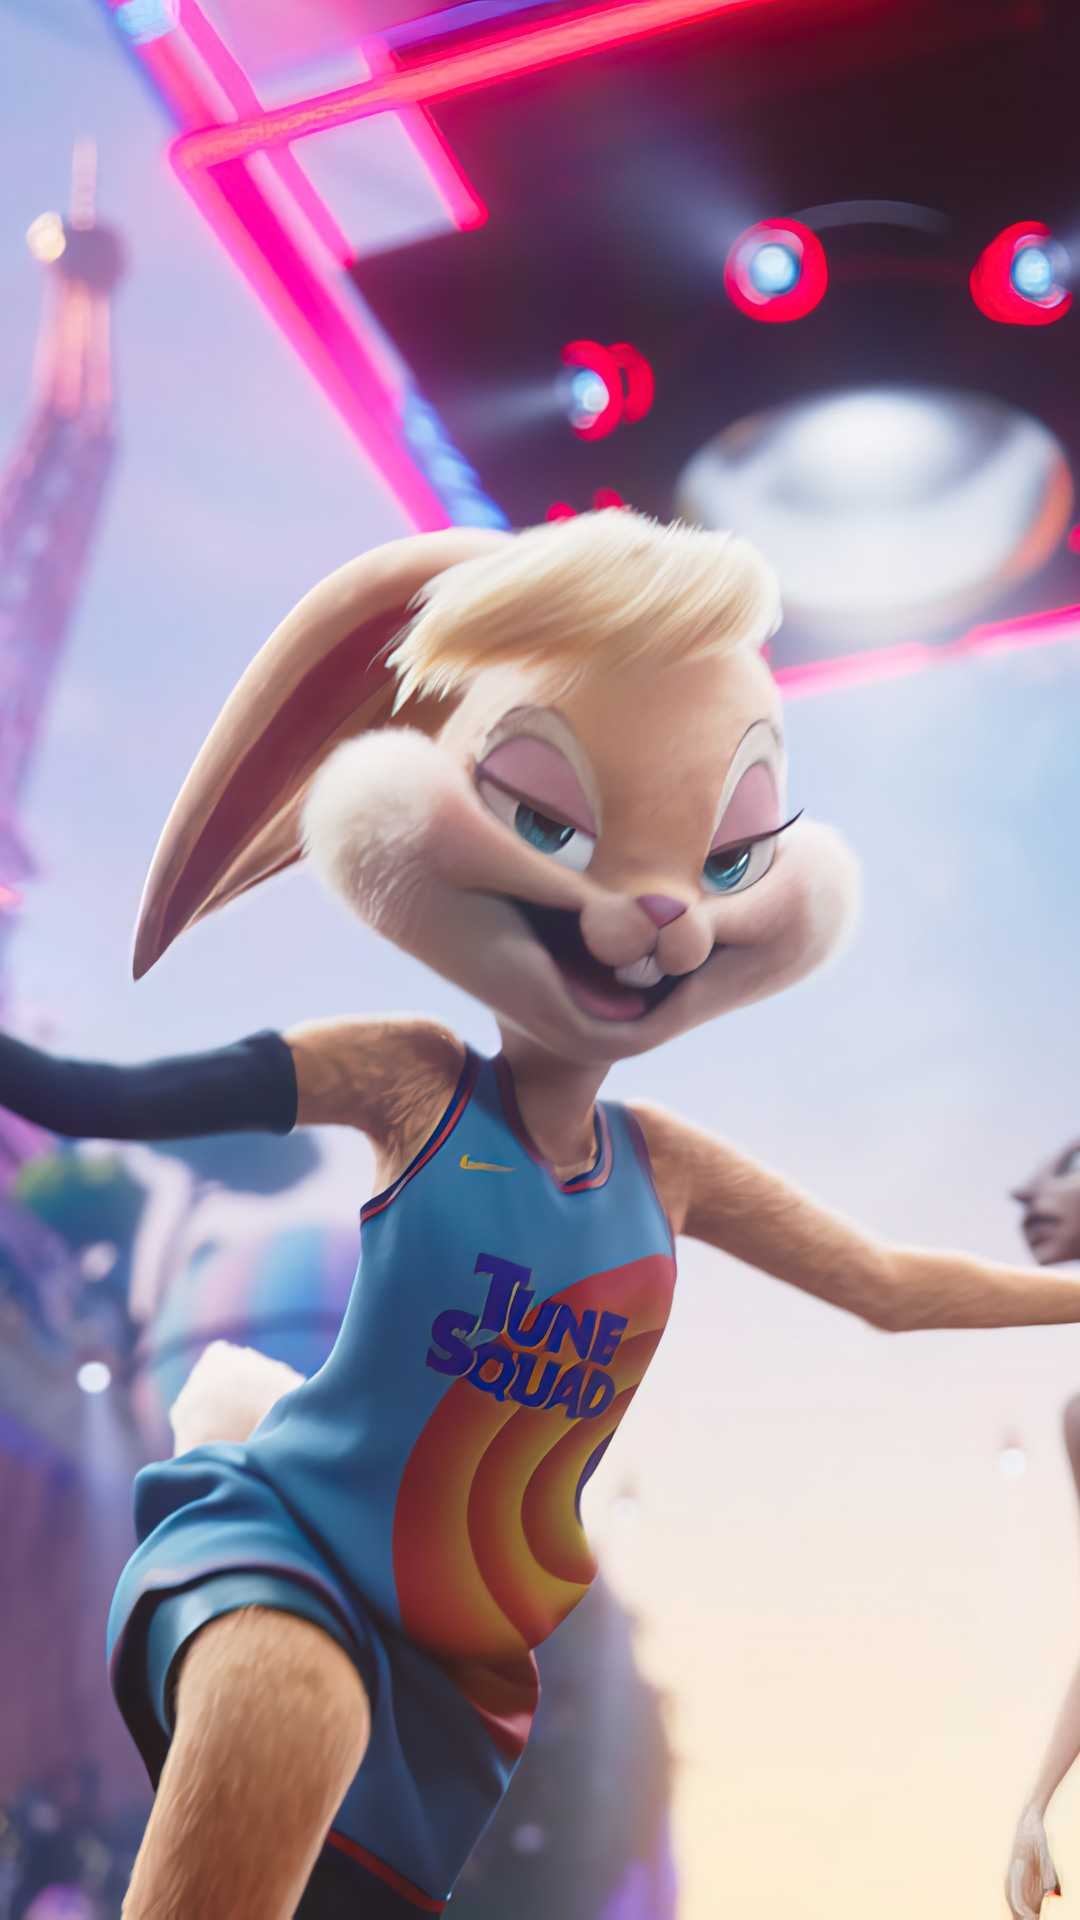 Space Jam: A New Legacy, Lola Bunny wallpapers, Dynamic and energetic, Awesome pictures, 1080x1920 Full HD Phone